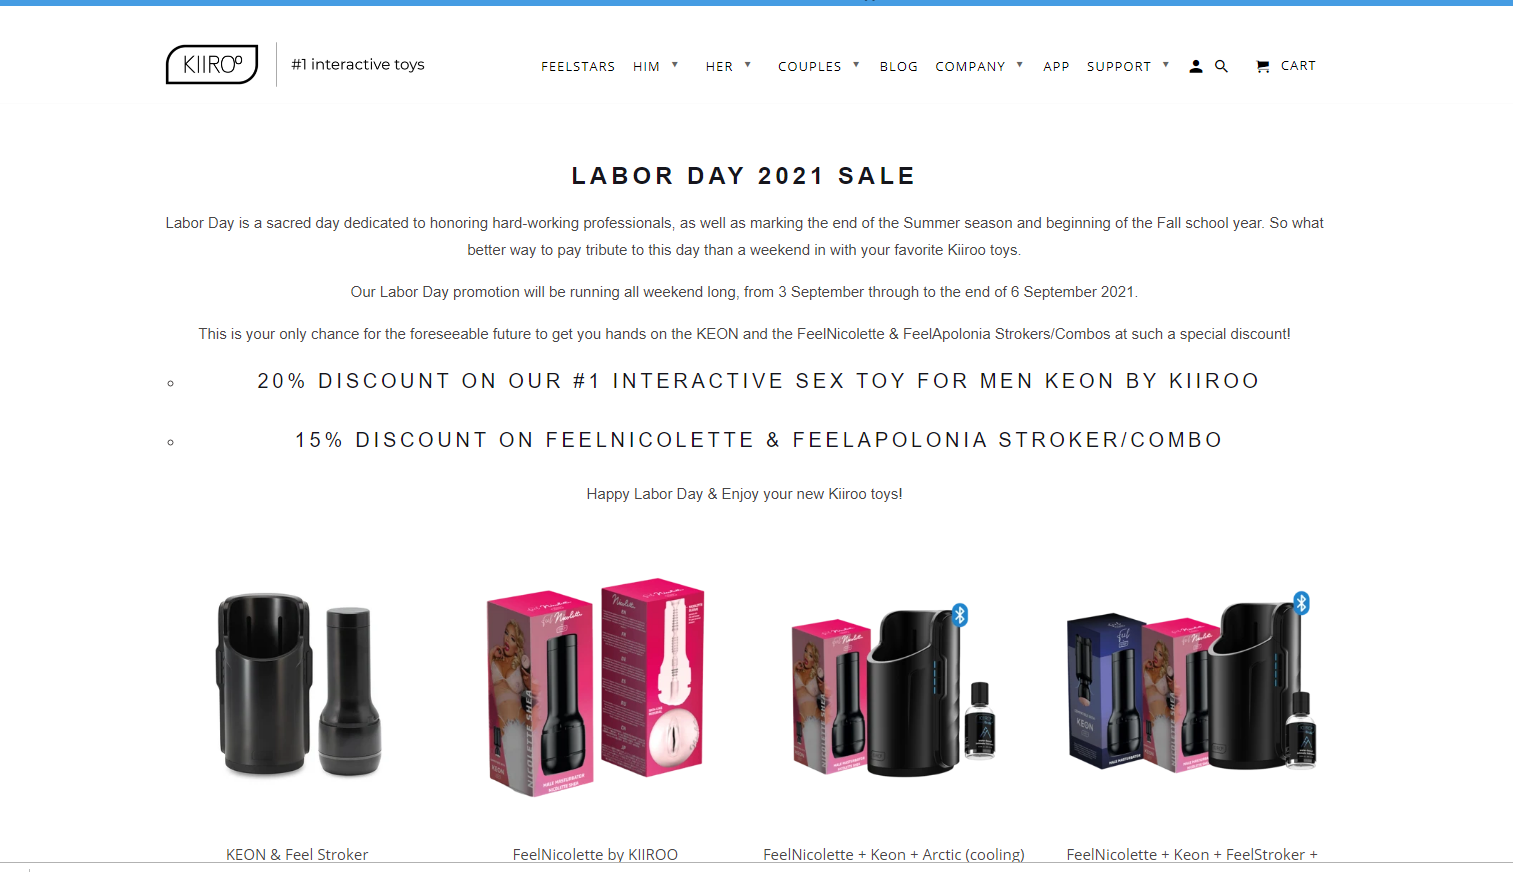 up to 20% off kiiroo labor day discount